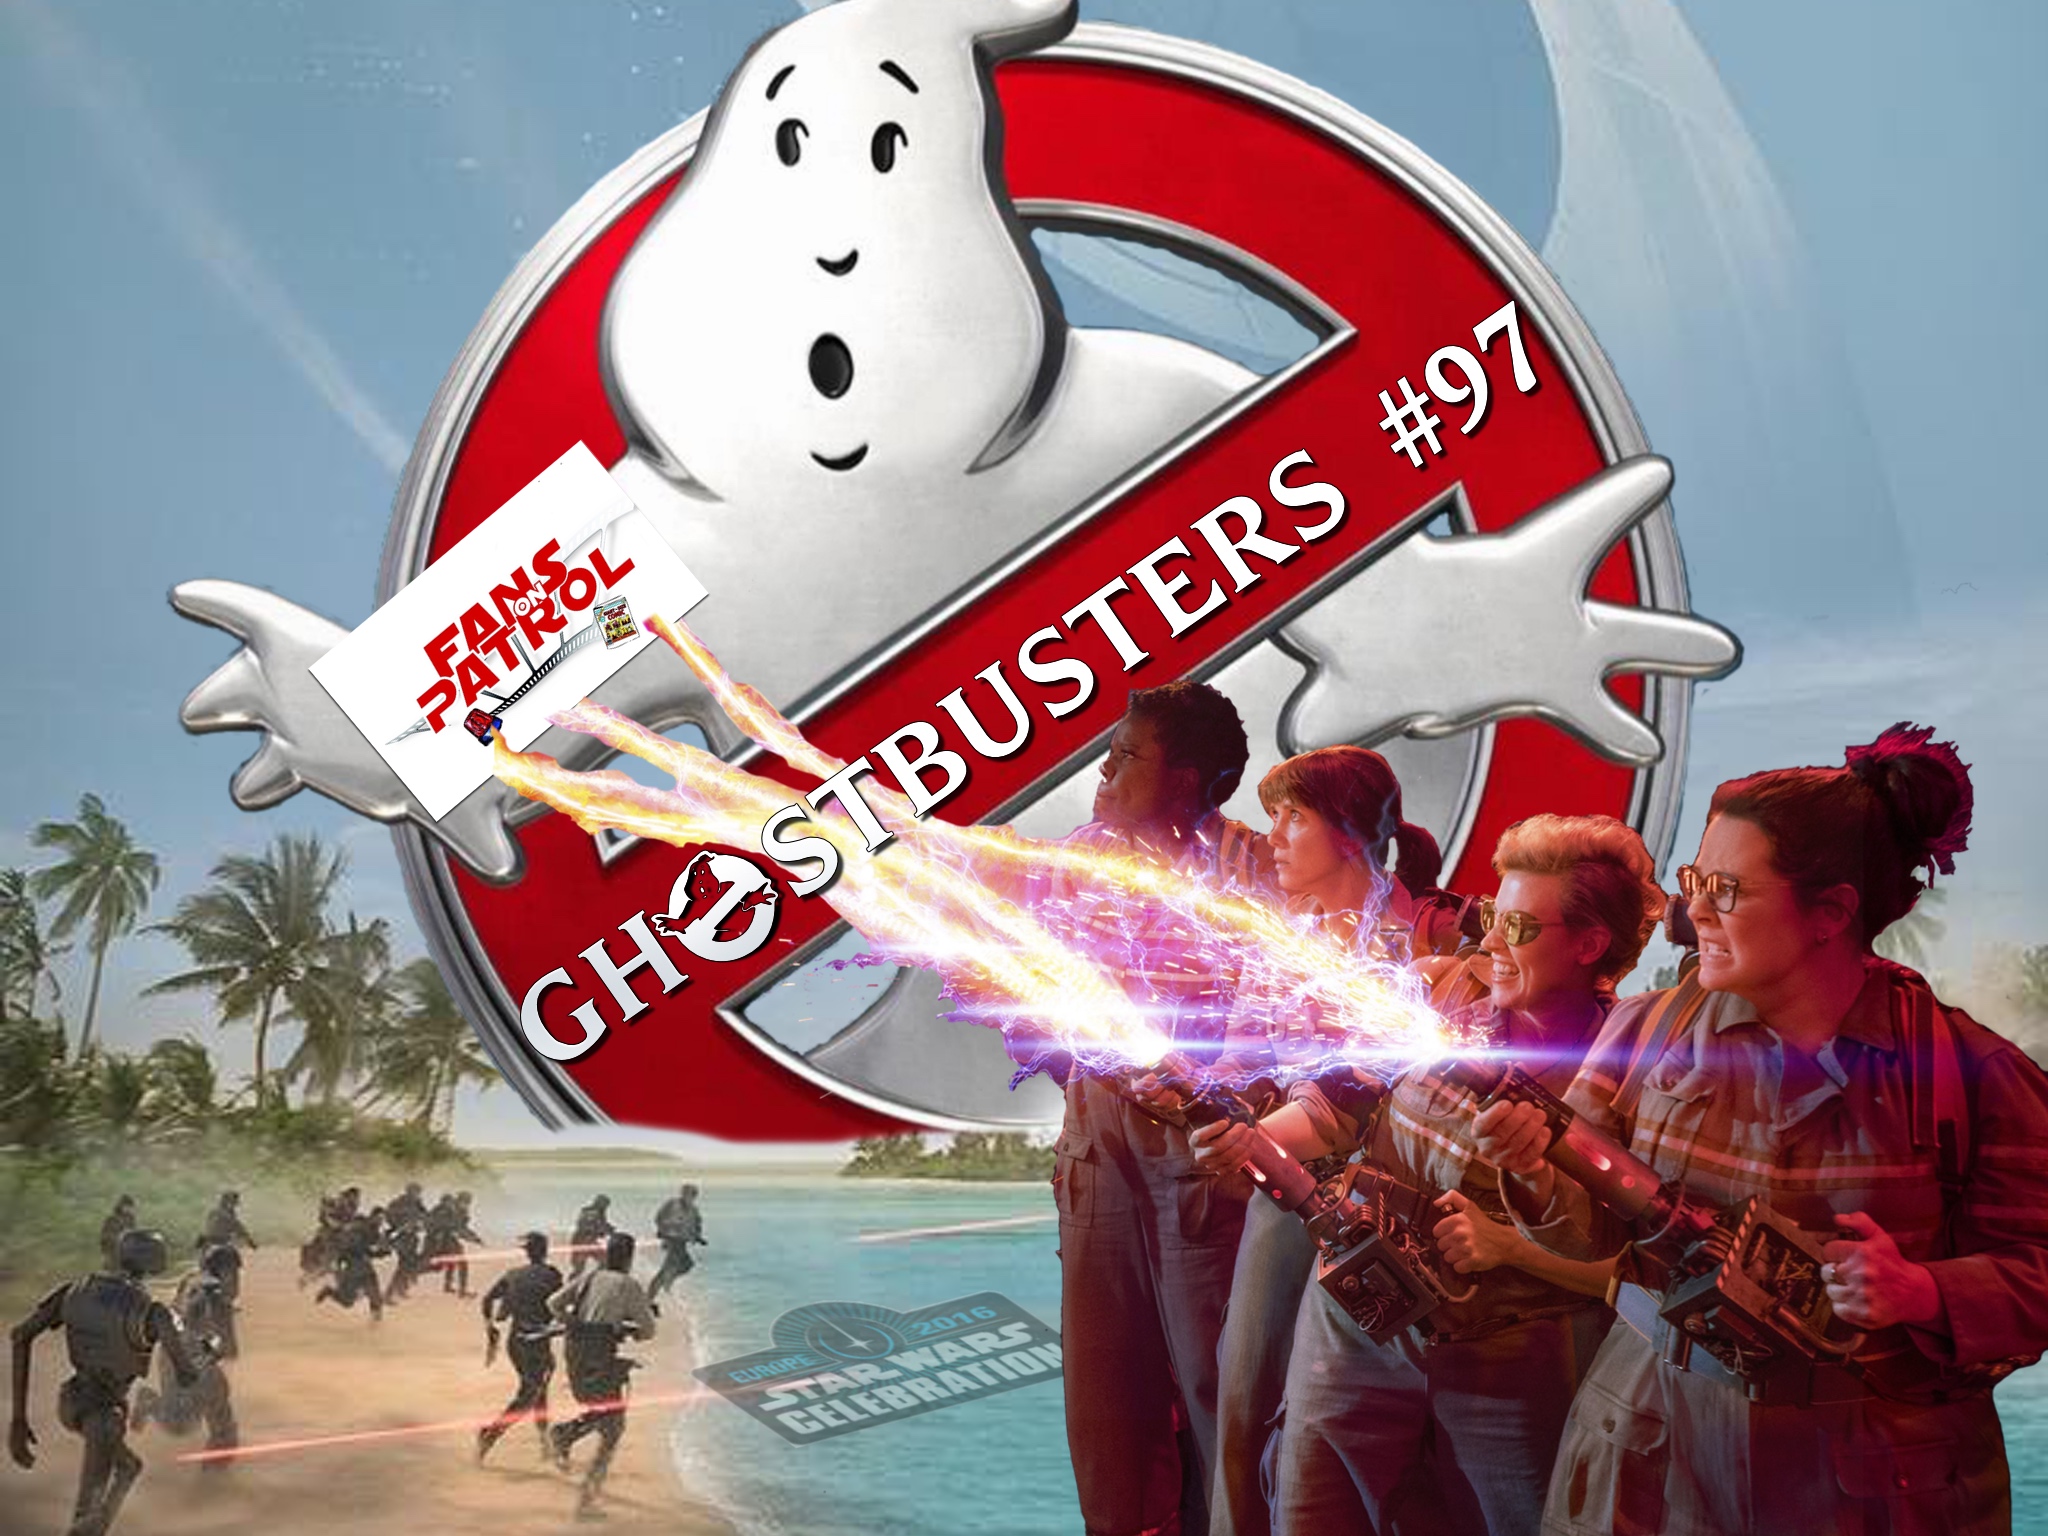 Ghostbusters #97